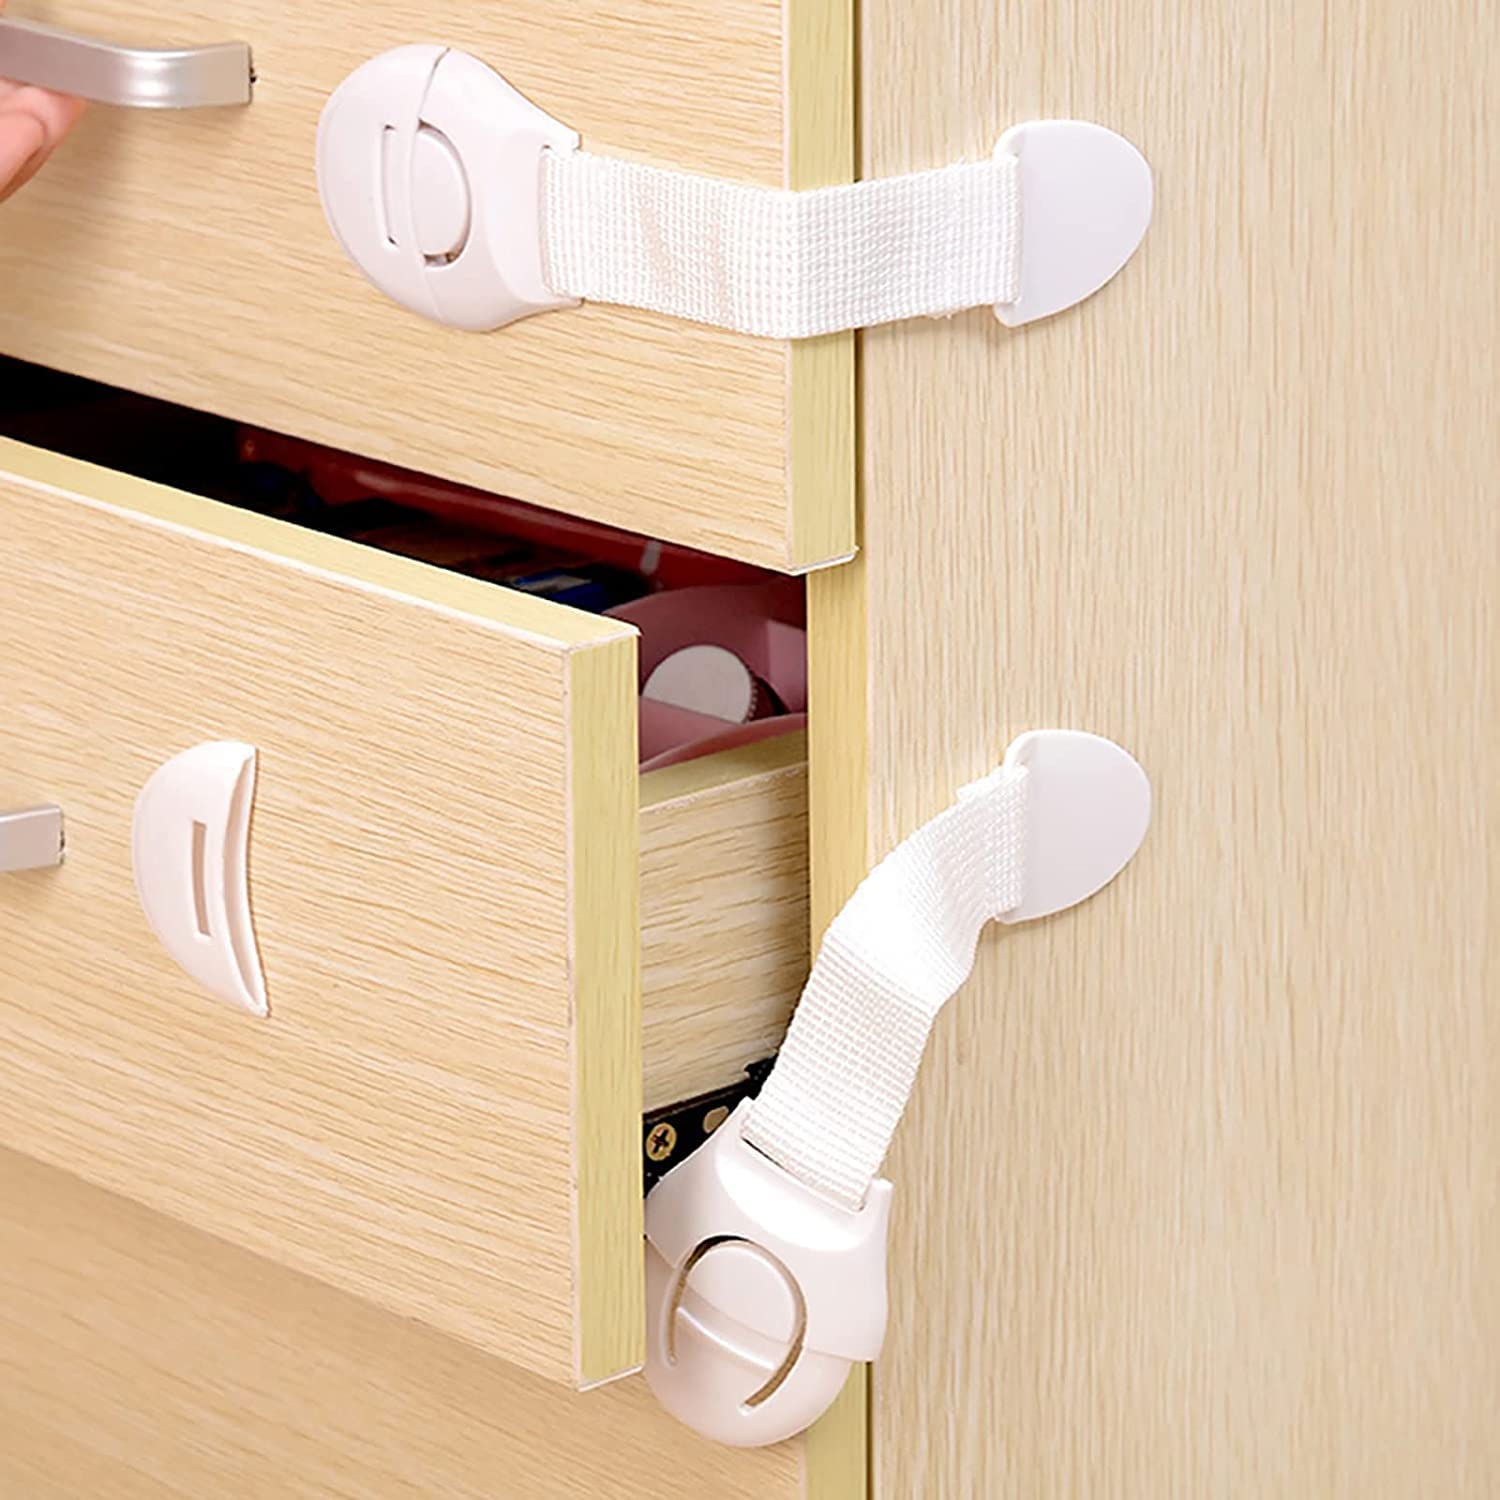 HEOATH Child Safety Cabinet Locks (10 Pack) - Baby Proofing